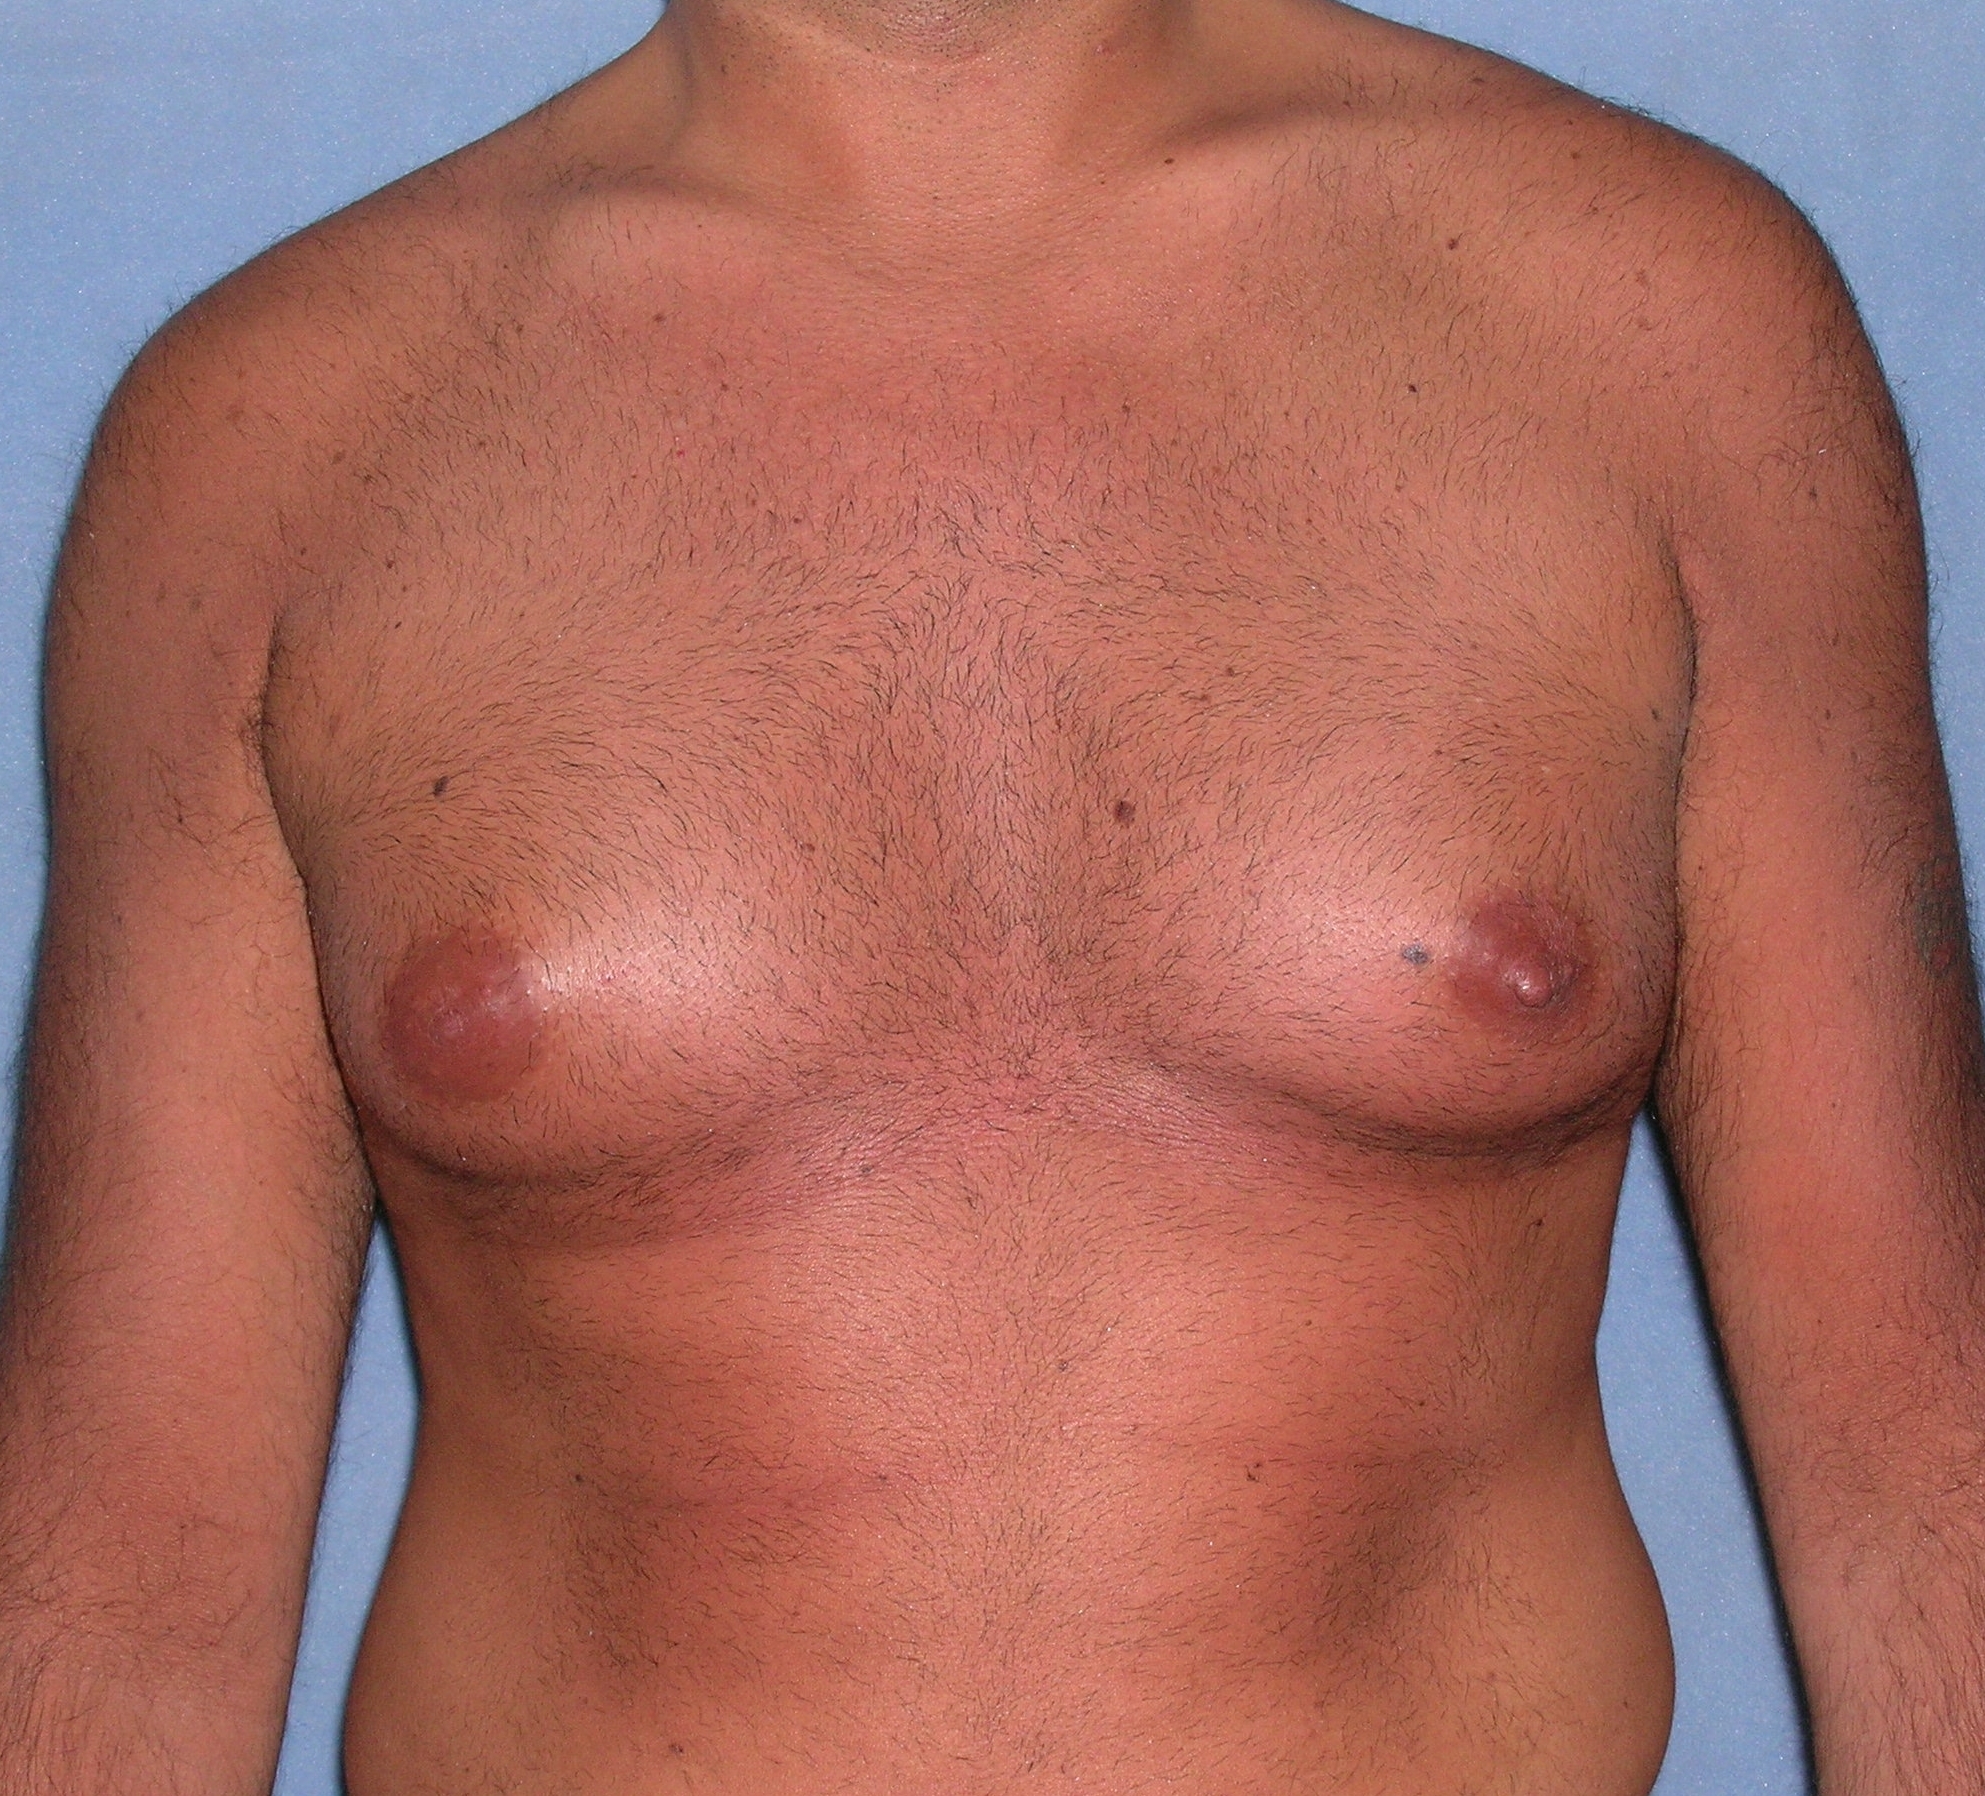 Male Breast Reduction Before and After Photos | Dr. Balakhani